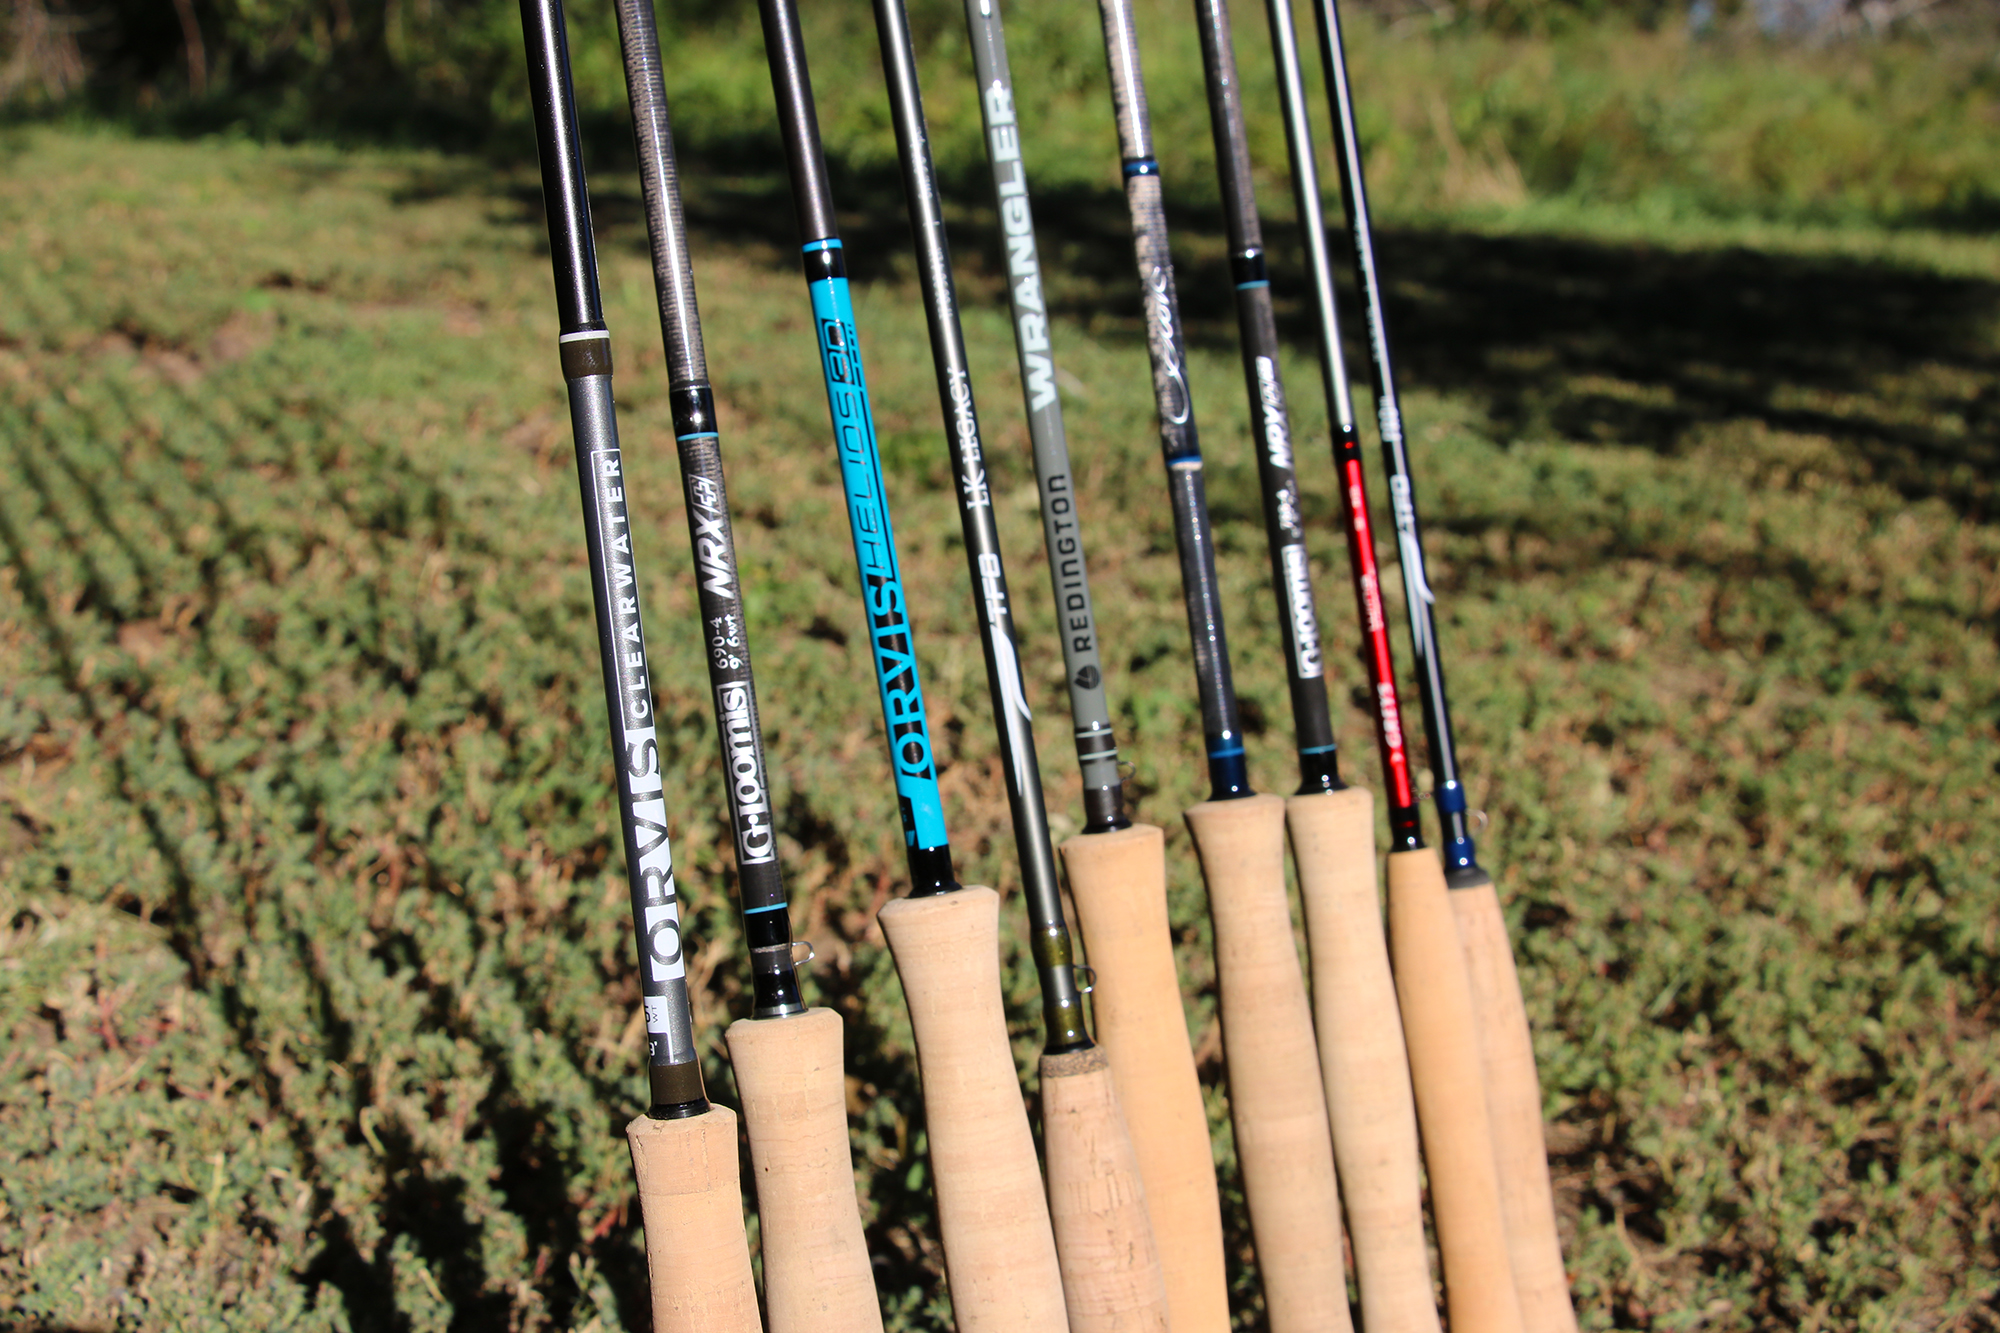 What's your favorite vintage orvis graphite?